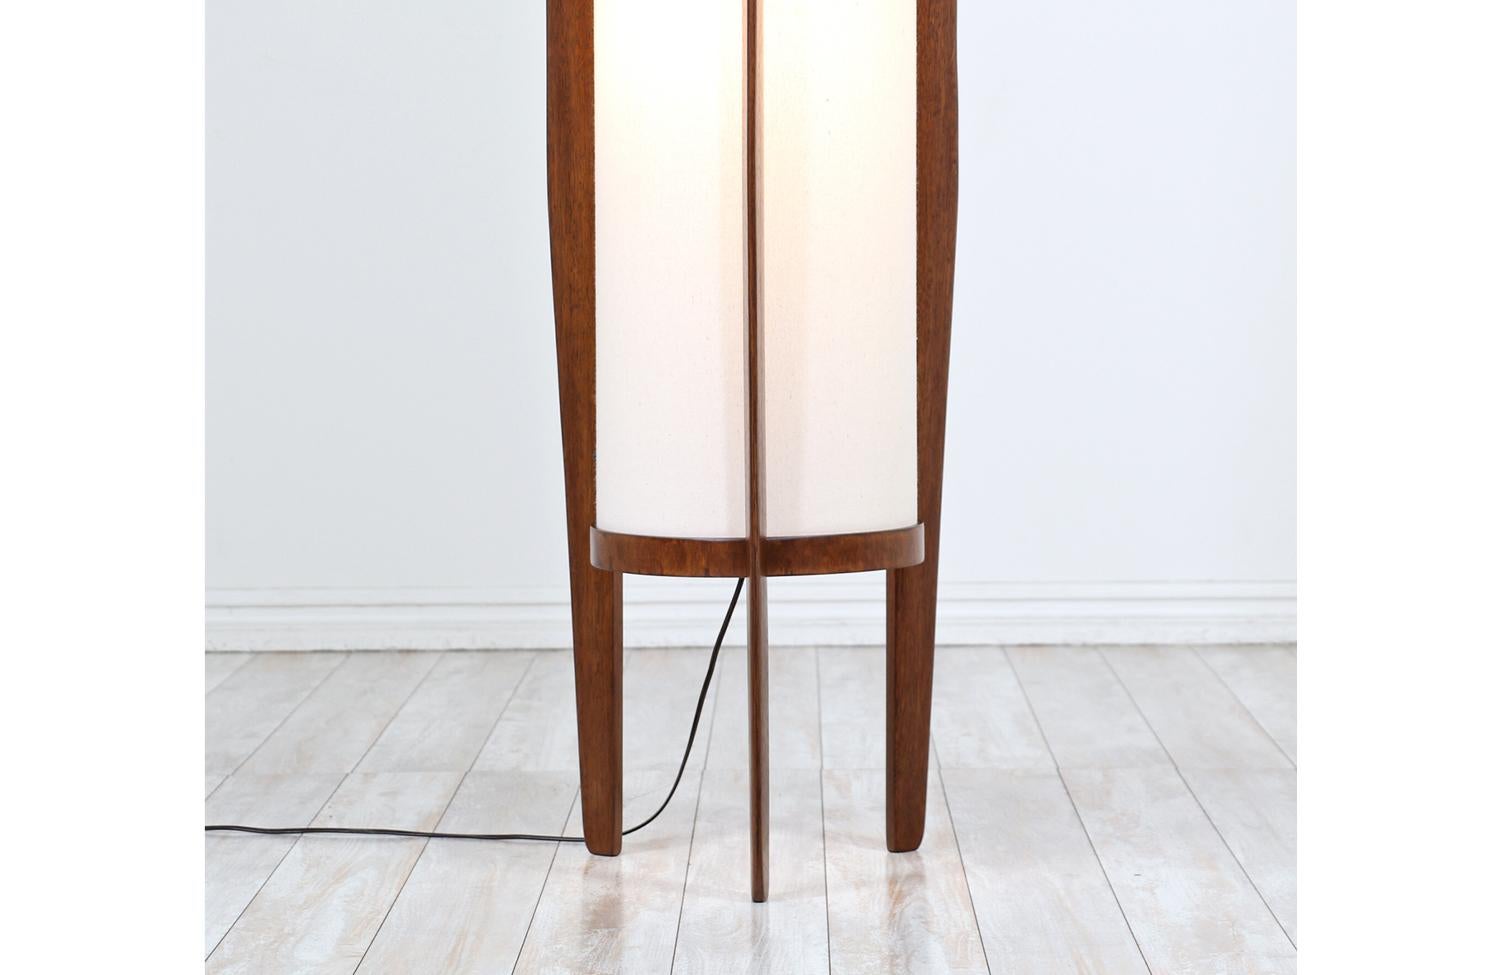 California Modern Sculpted Walnut Floor Lamp with New Linen Shade by Modeline 2